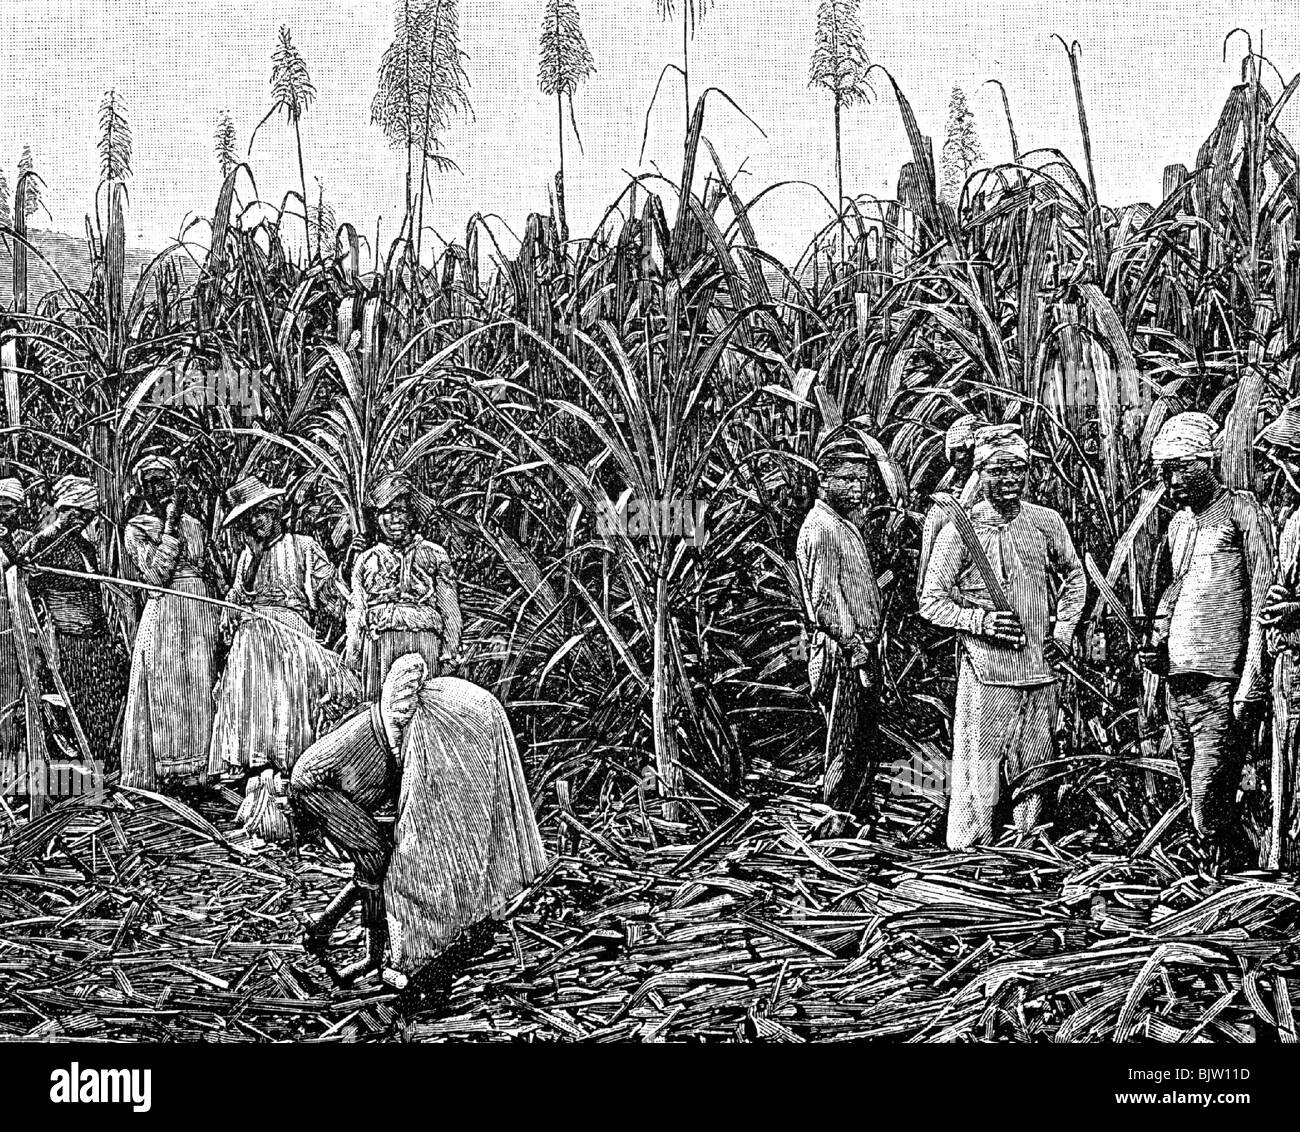 food, sugar, sugarcane, harvest, South America or Caribbean, wood engraving, 19th century, historic, historical, the Caribbean Sea, field, farming, agriculture, cultivation, field work, fieldwork, agricultural work, farm labour, agricultural labourer, peasant labourer, agricultural labourers, peasant labourers, farmhand, people, Stock Photo